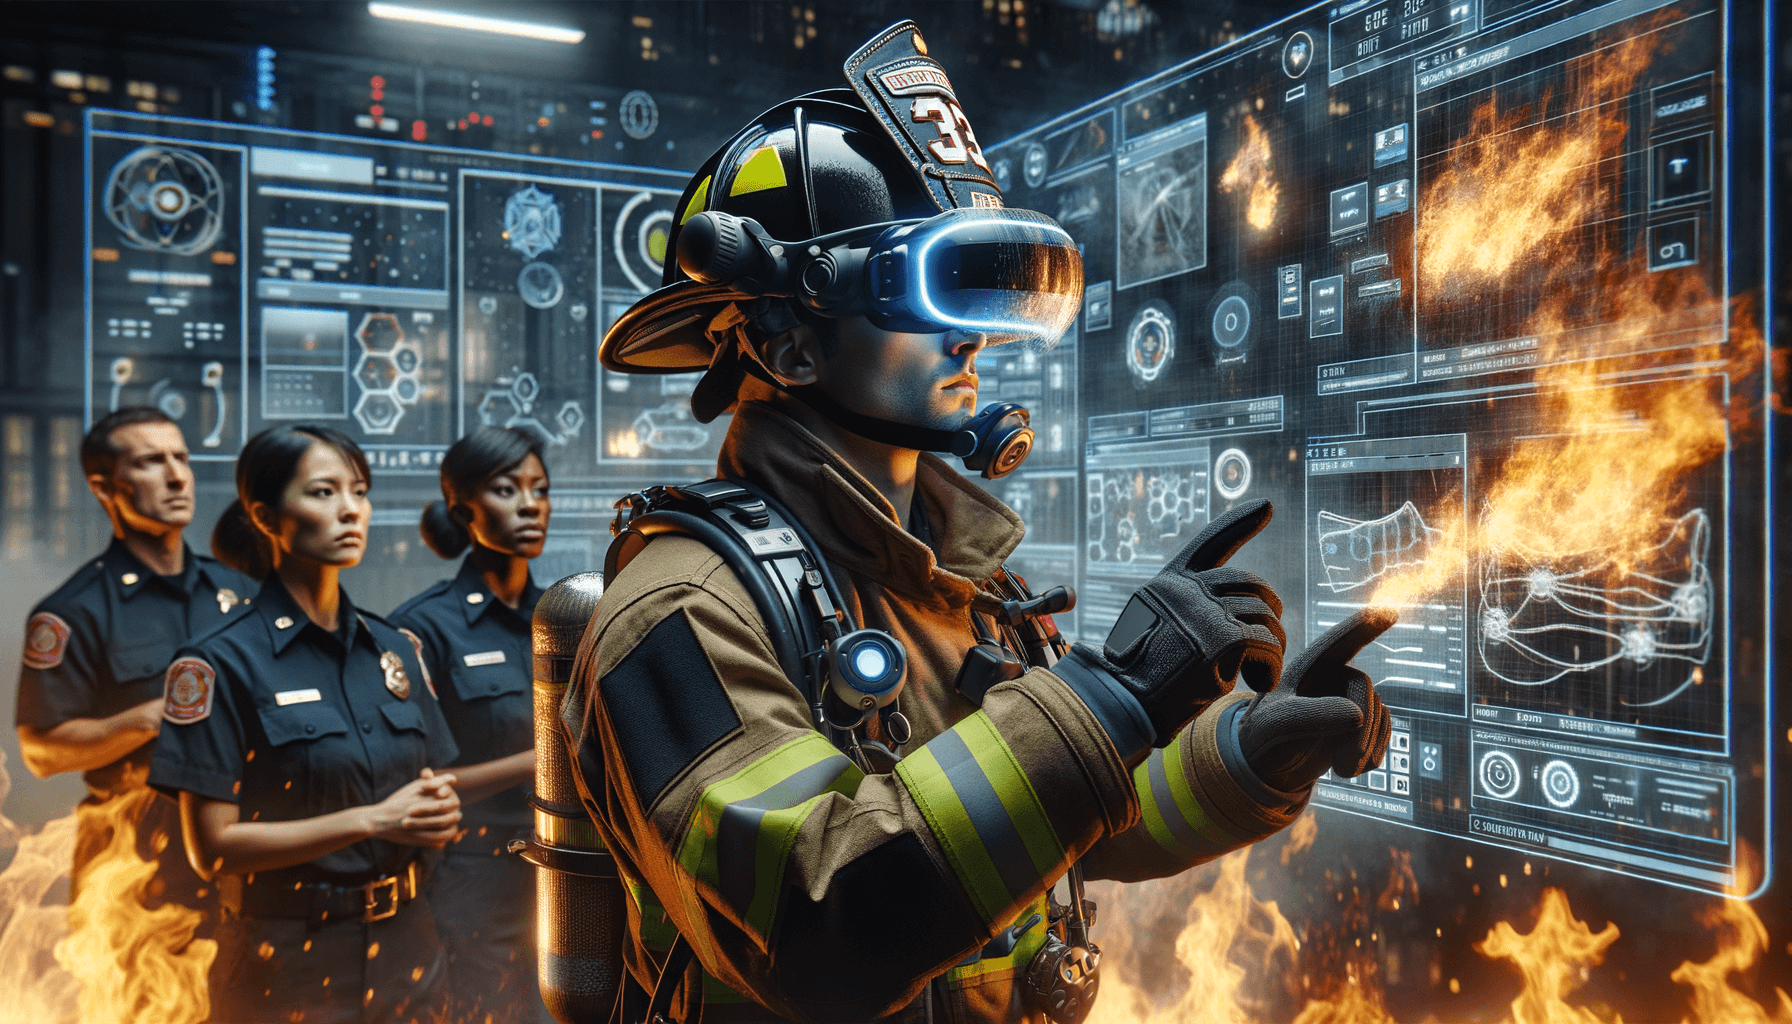 Firefighter wearing AR headset amidst virtual fire and smoke, showcasing Gravity Jack's advanced AR training technology.